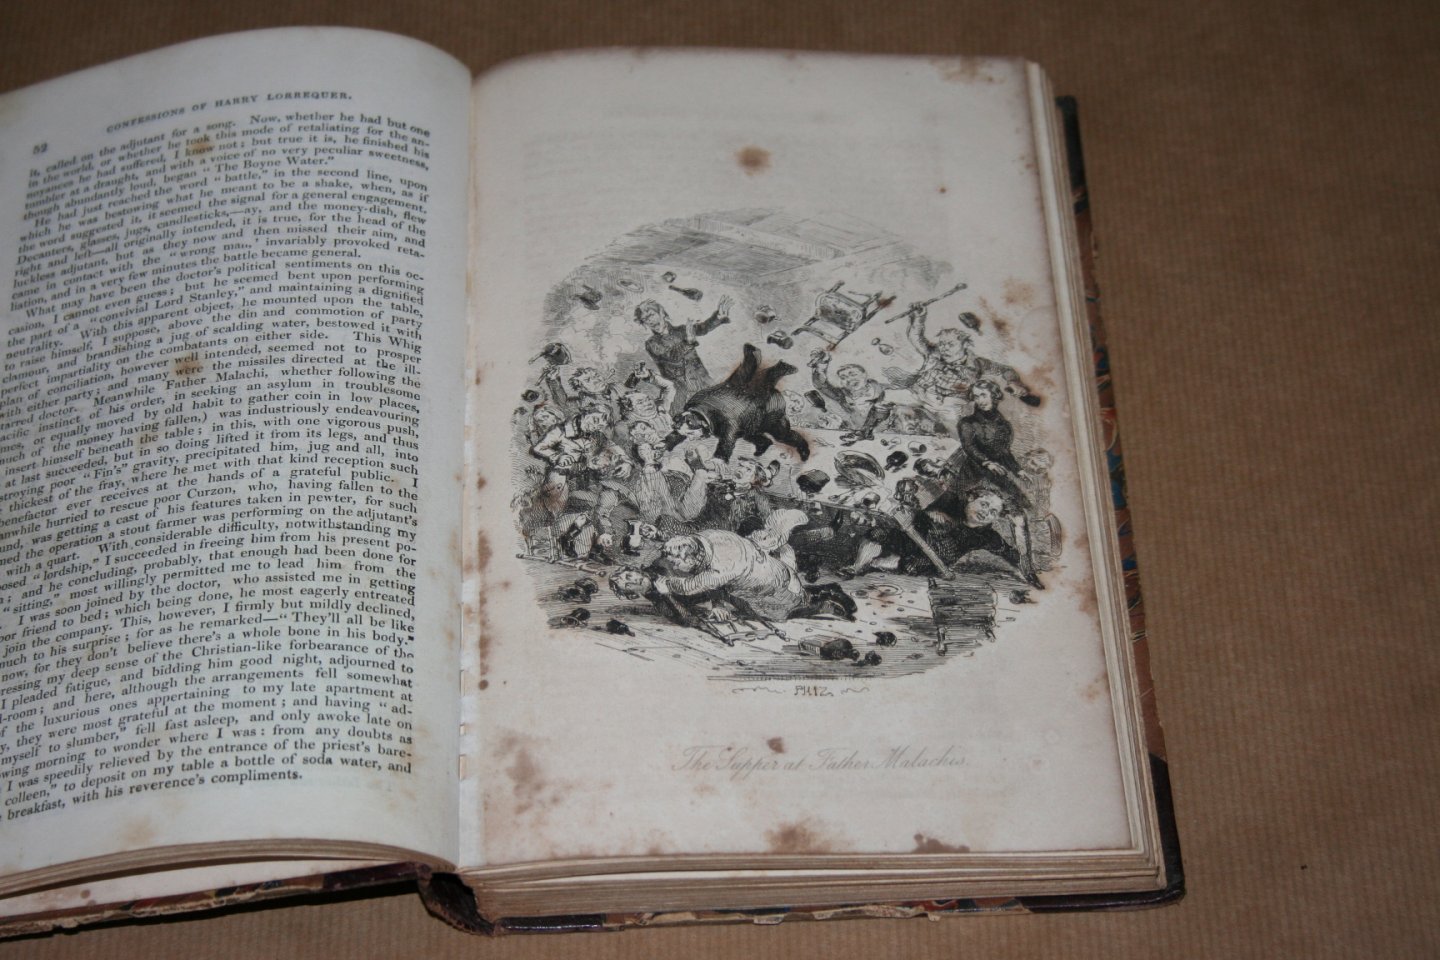 Charles Lever --  With numerous illustrations by Phiz - The confessions of Harry Lorrequer